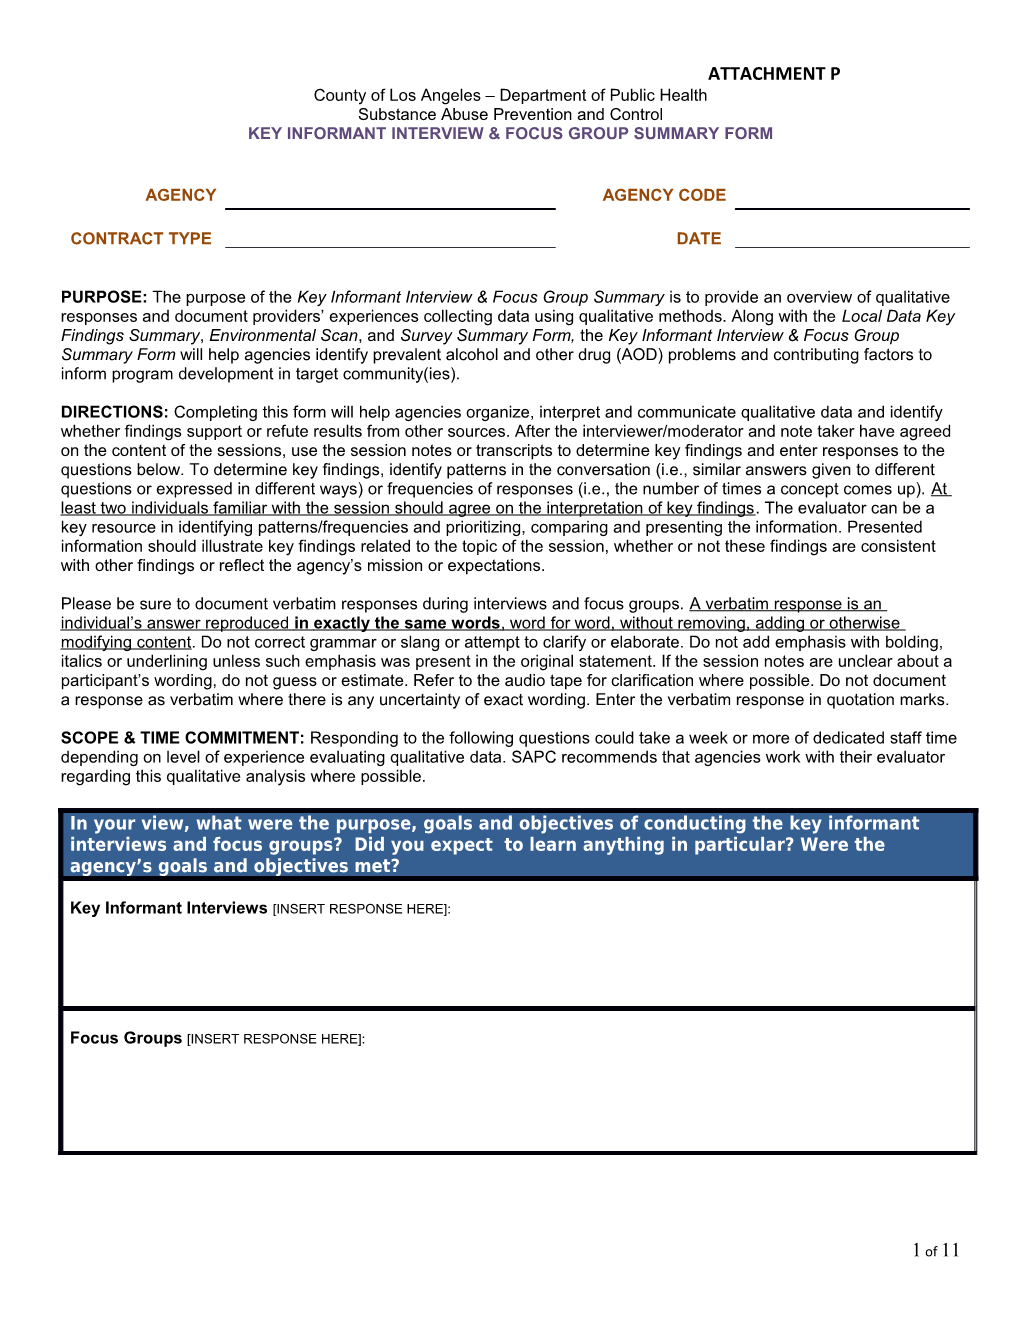 Key Informant Interview & Focus Group Summary FORM